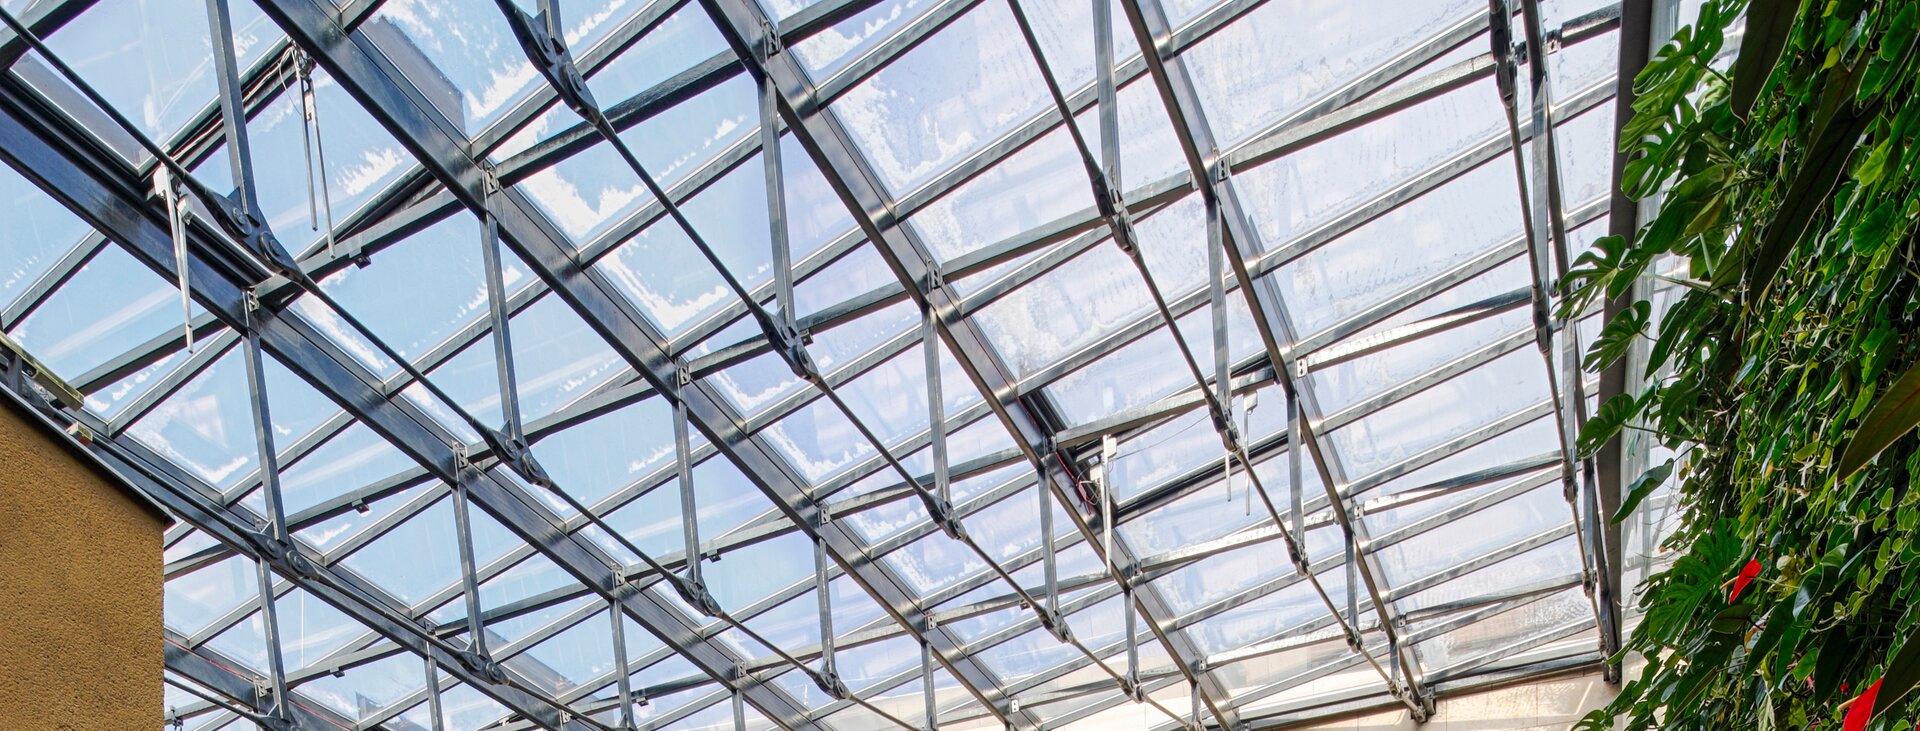 Light-flooded glass roof with metal struts